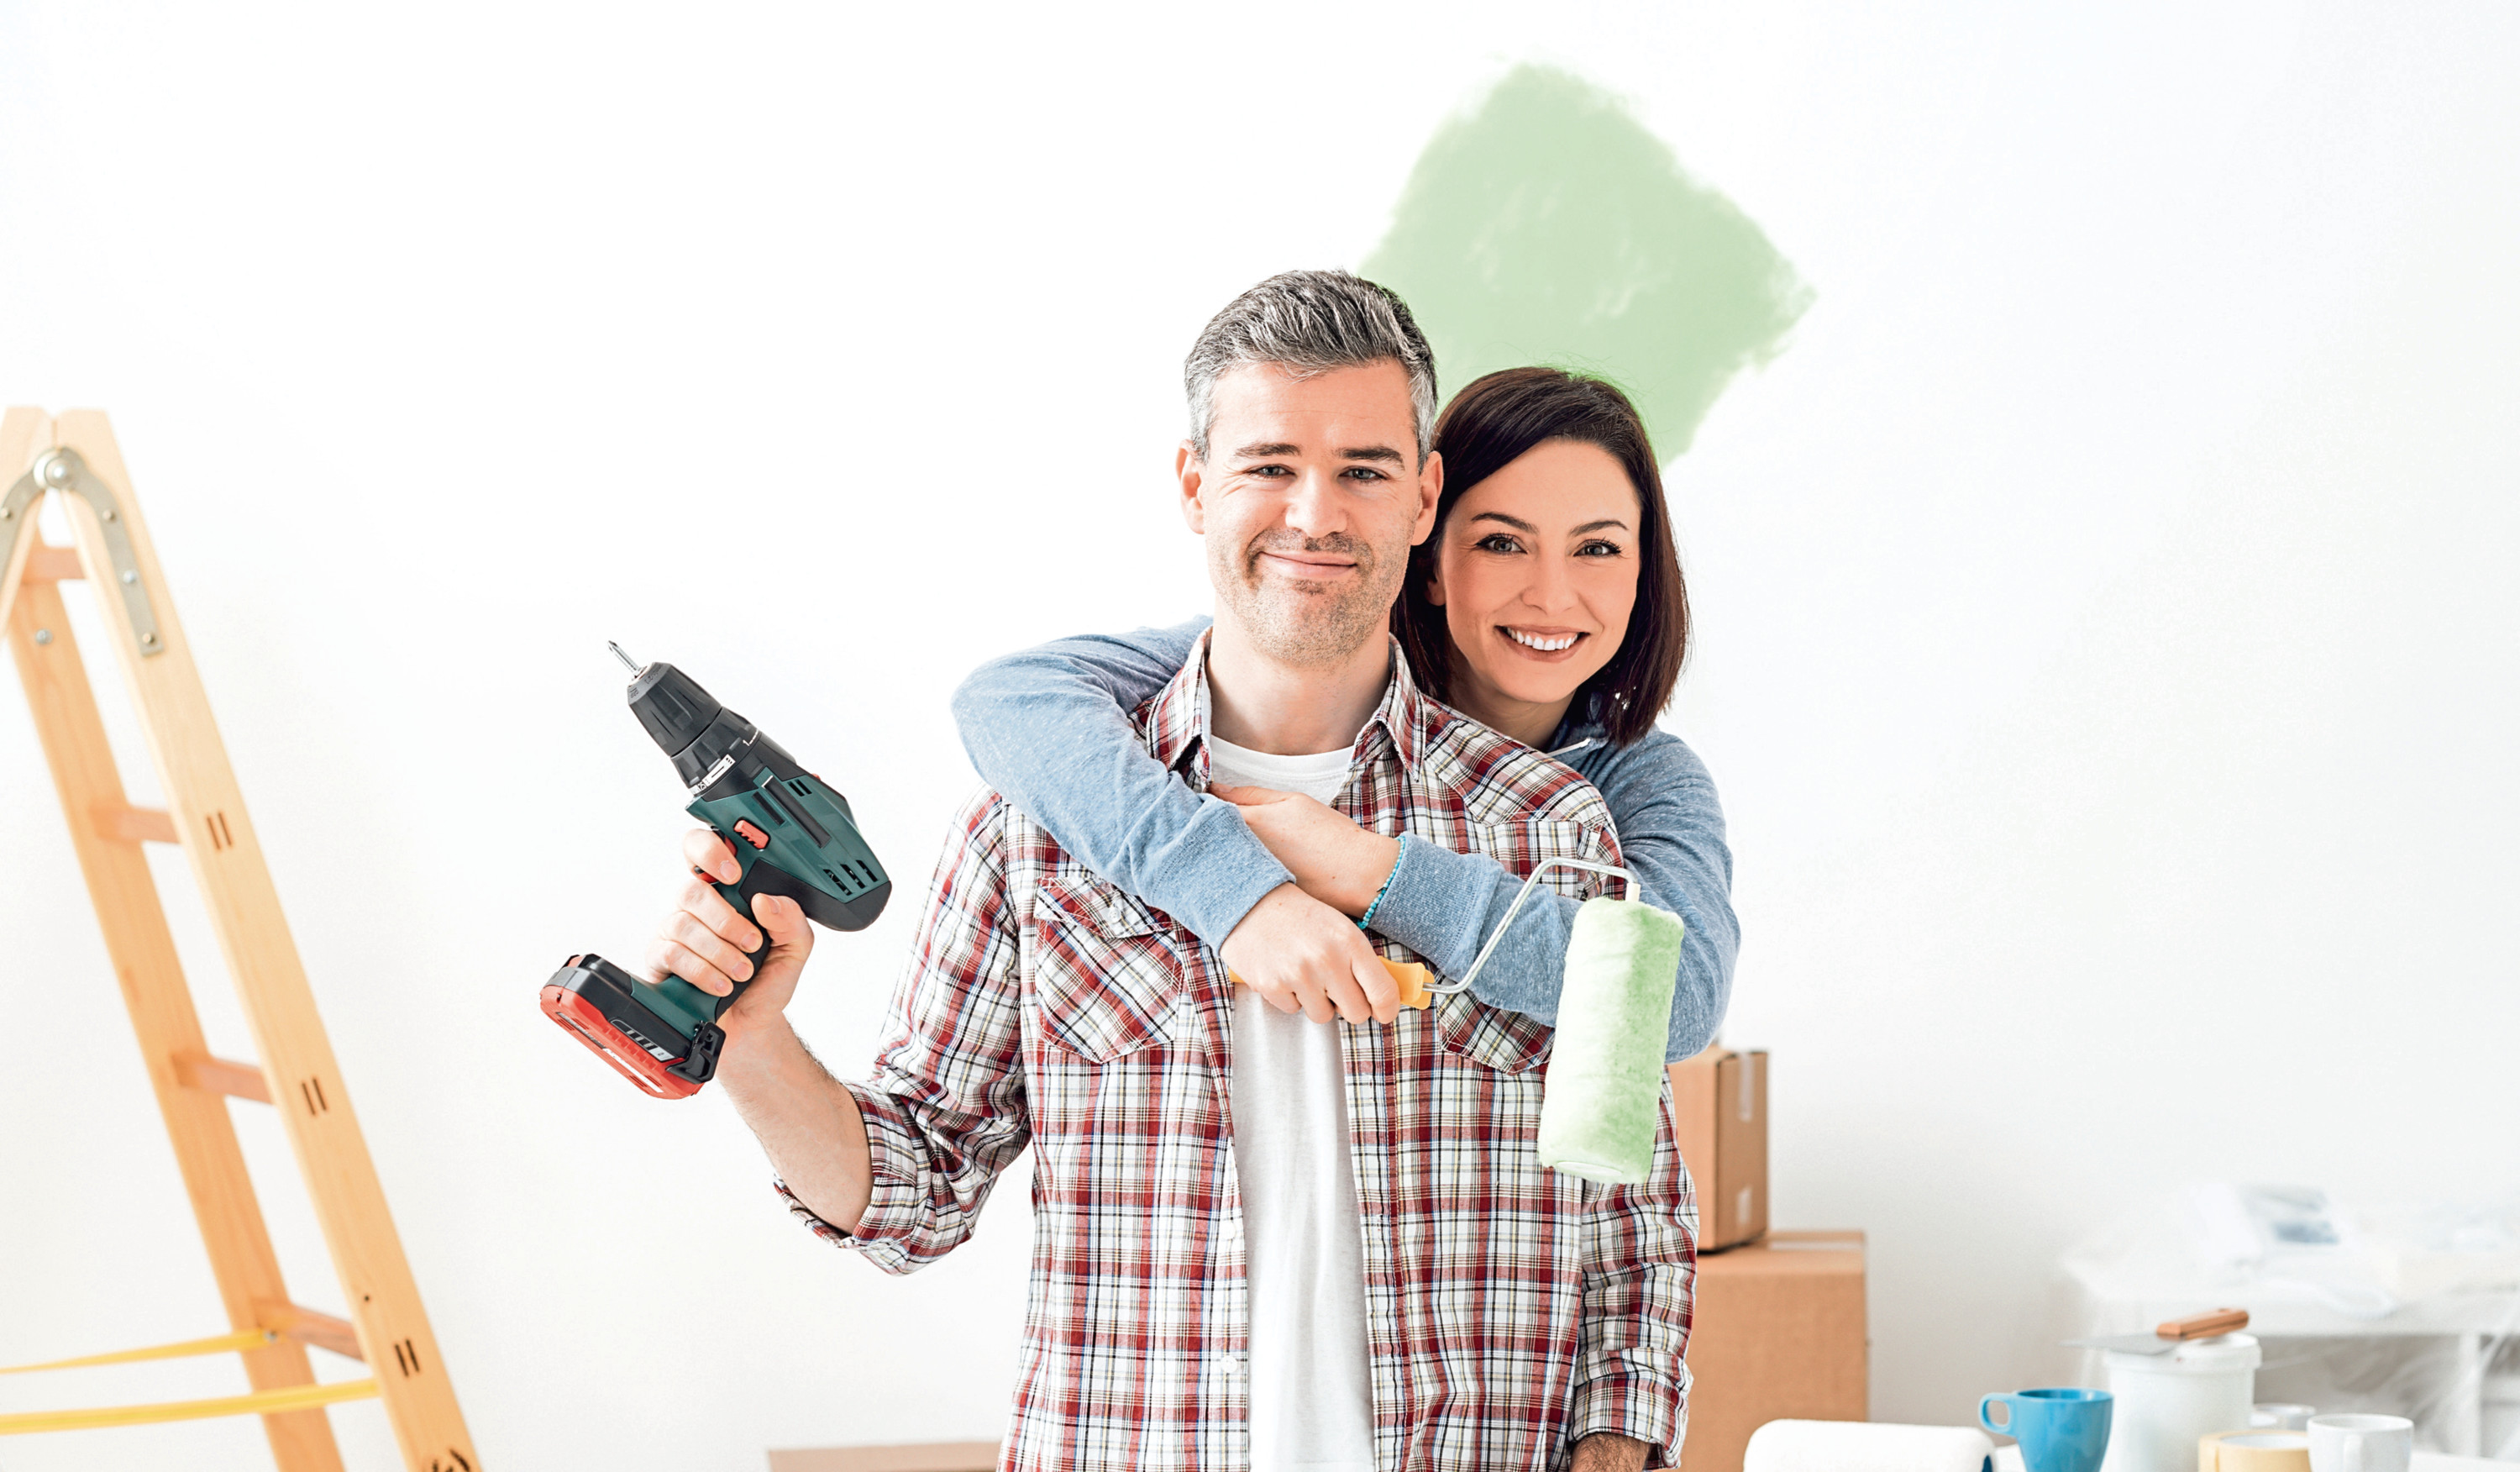 Smiling loving couple doing home renovations, the woman is holding a paint roller and the man is using a drill